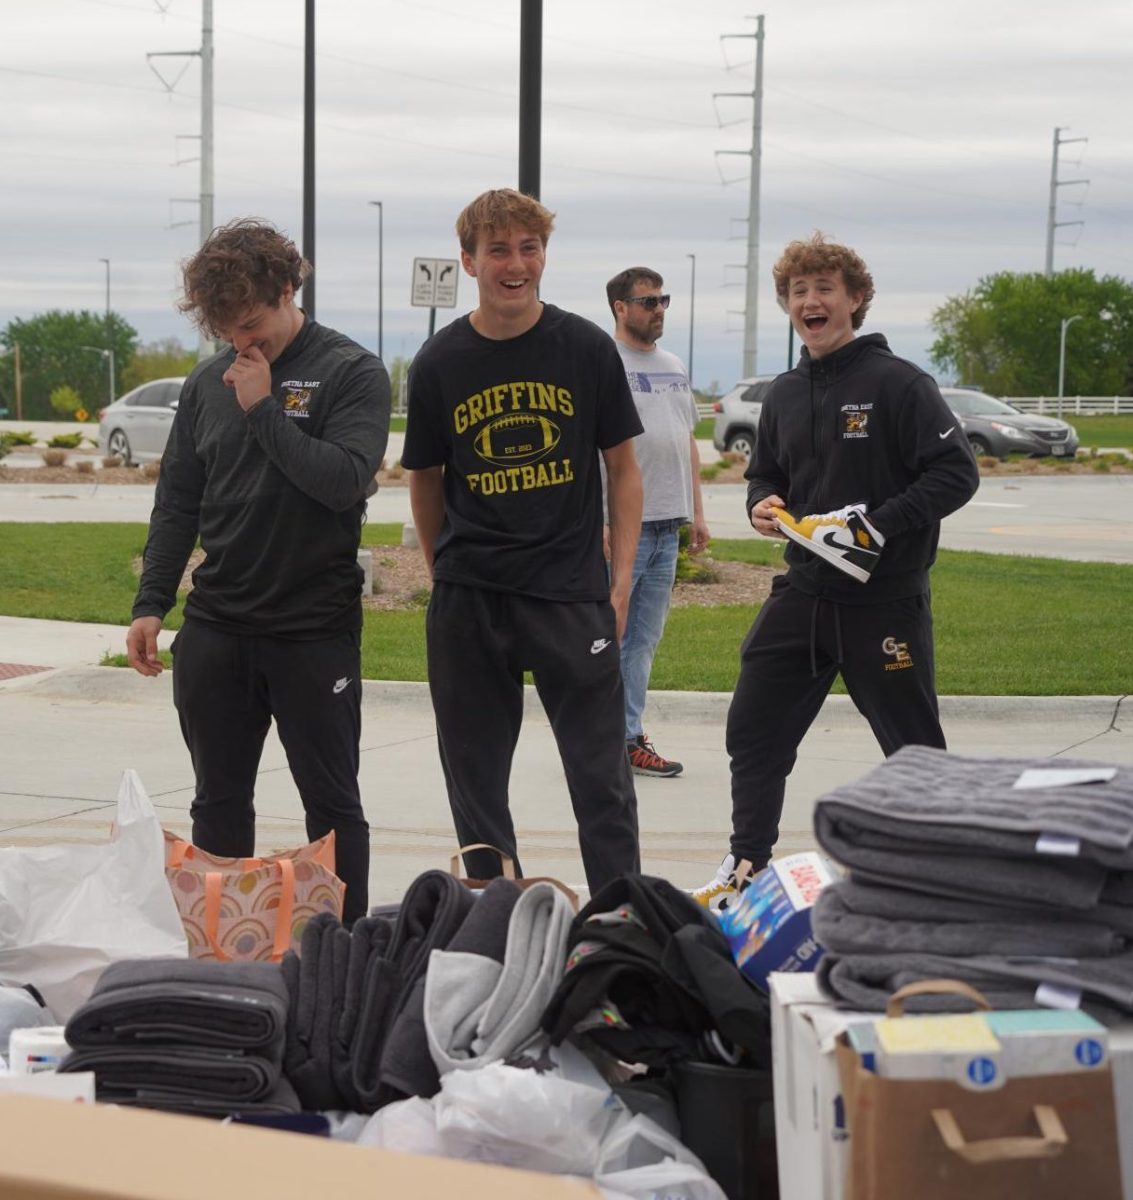 Helping to load the cars full of donations toward the end of the drive, juniors Mason Gunn, Joseph Costanzo and Grayson Fisher laugh. 